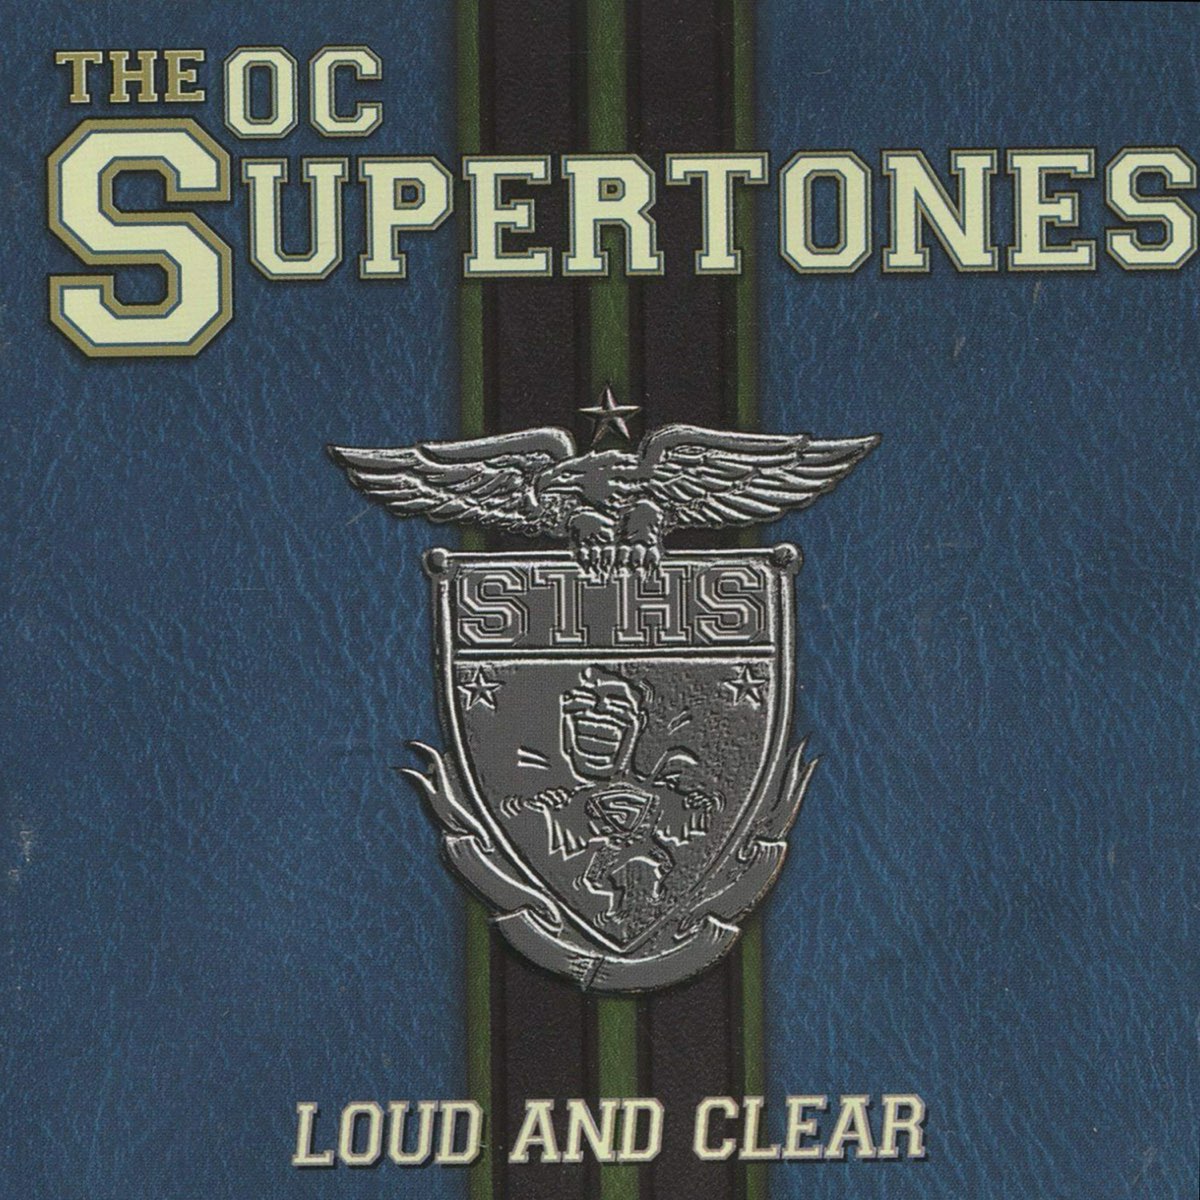 Loud and clear. The Supertones. Supertone Clear.